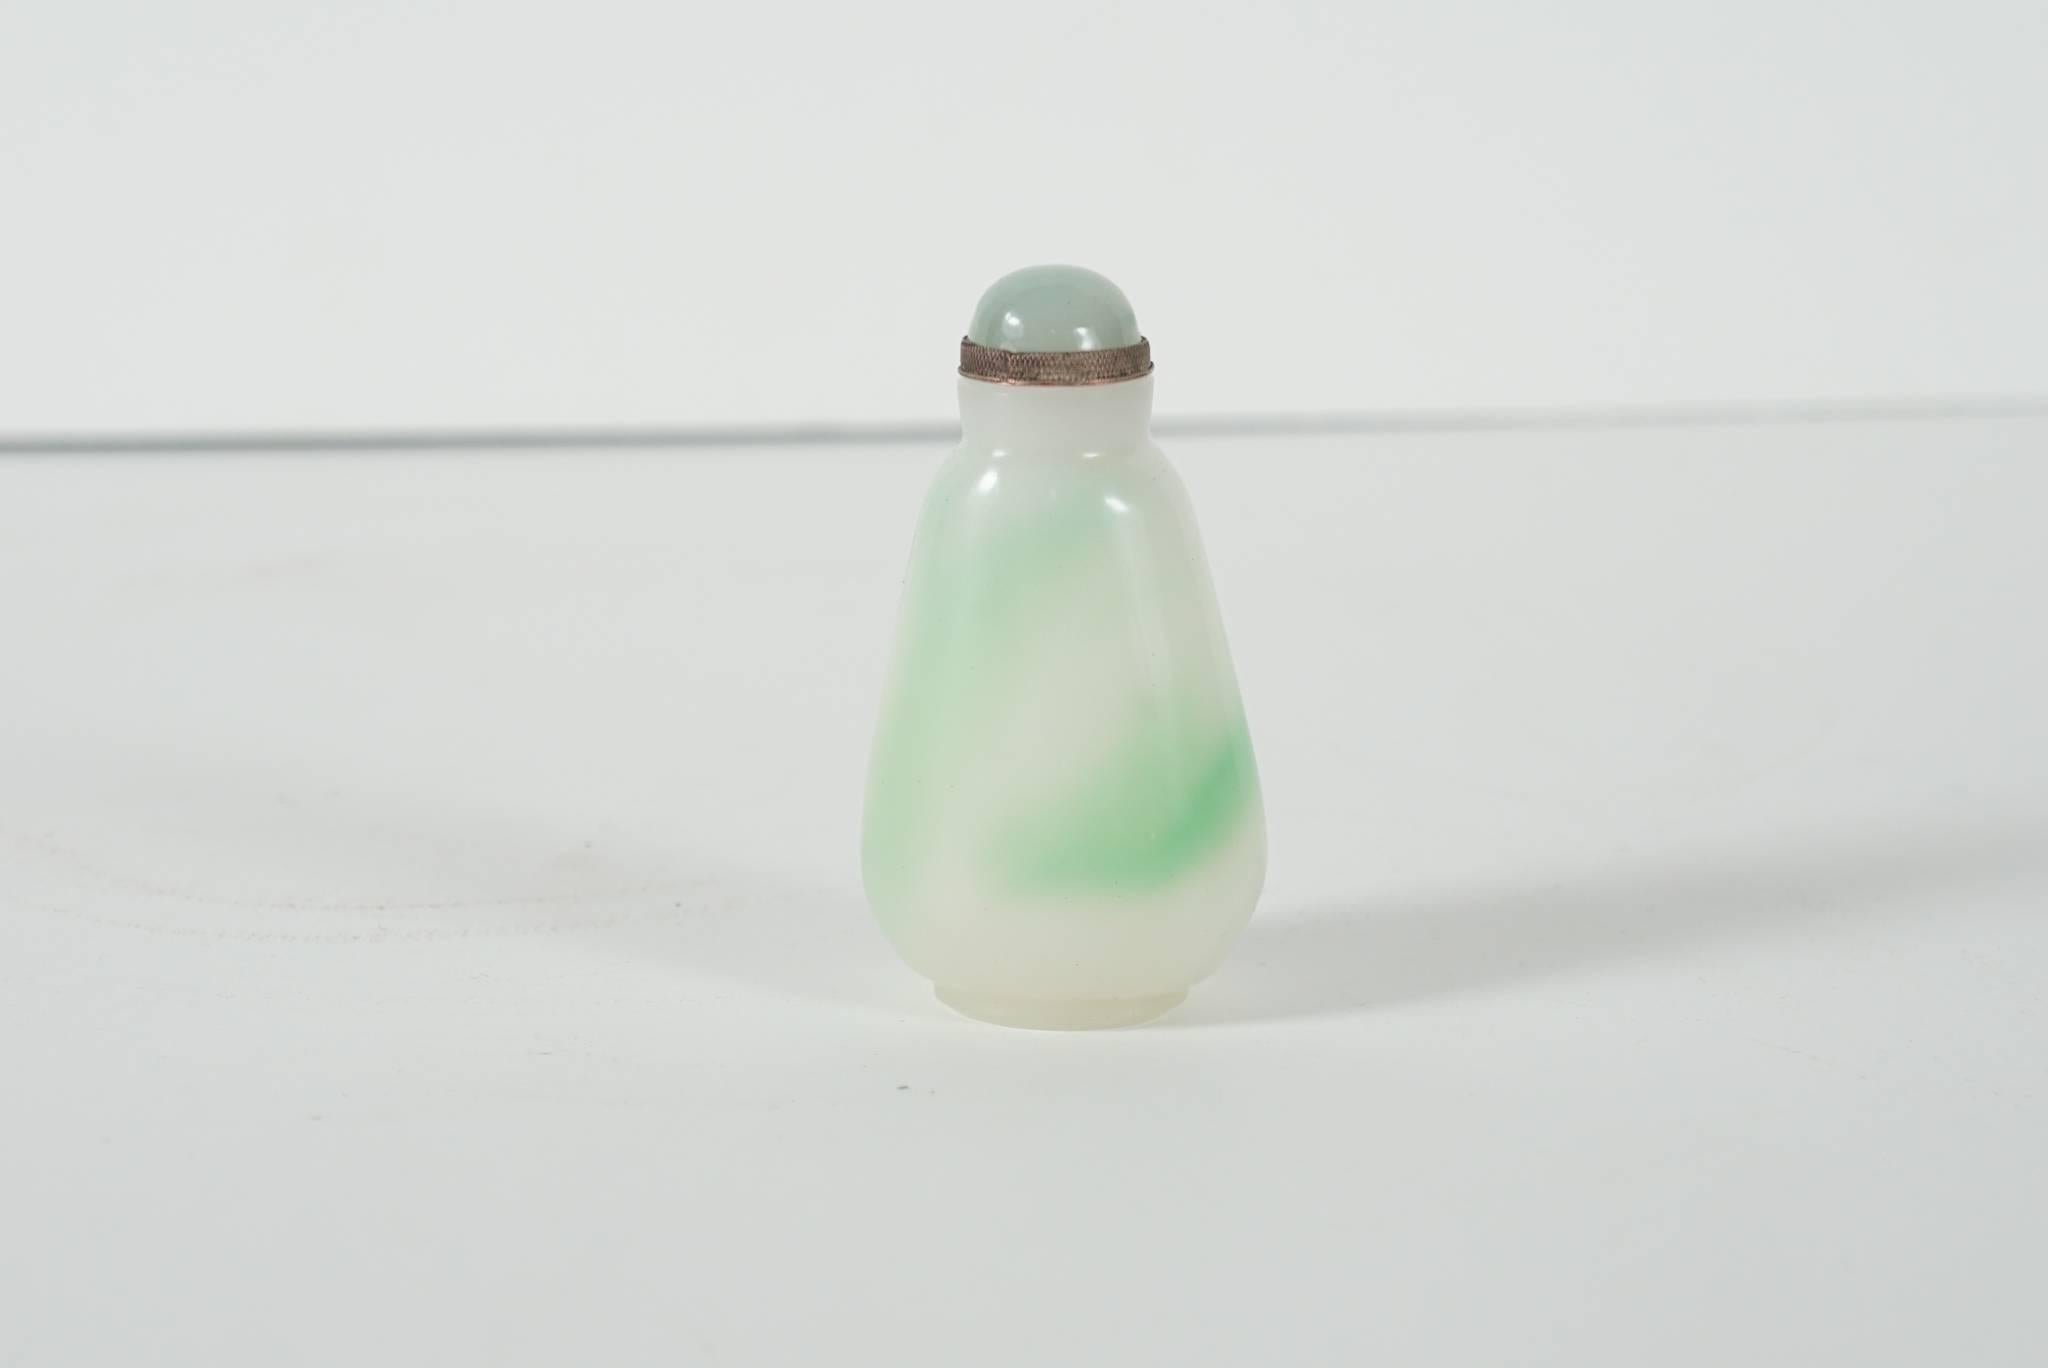 This small beautiful carved stone bottle carved from a piece of jadeite that runs from a white to an emerald green is Chinese and comes from the late 19th century to the Republic Period of China’s history. The lid is set in copper alloys that have